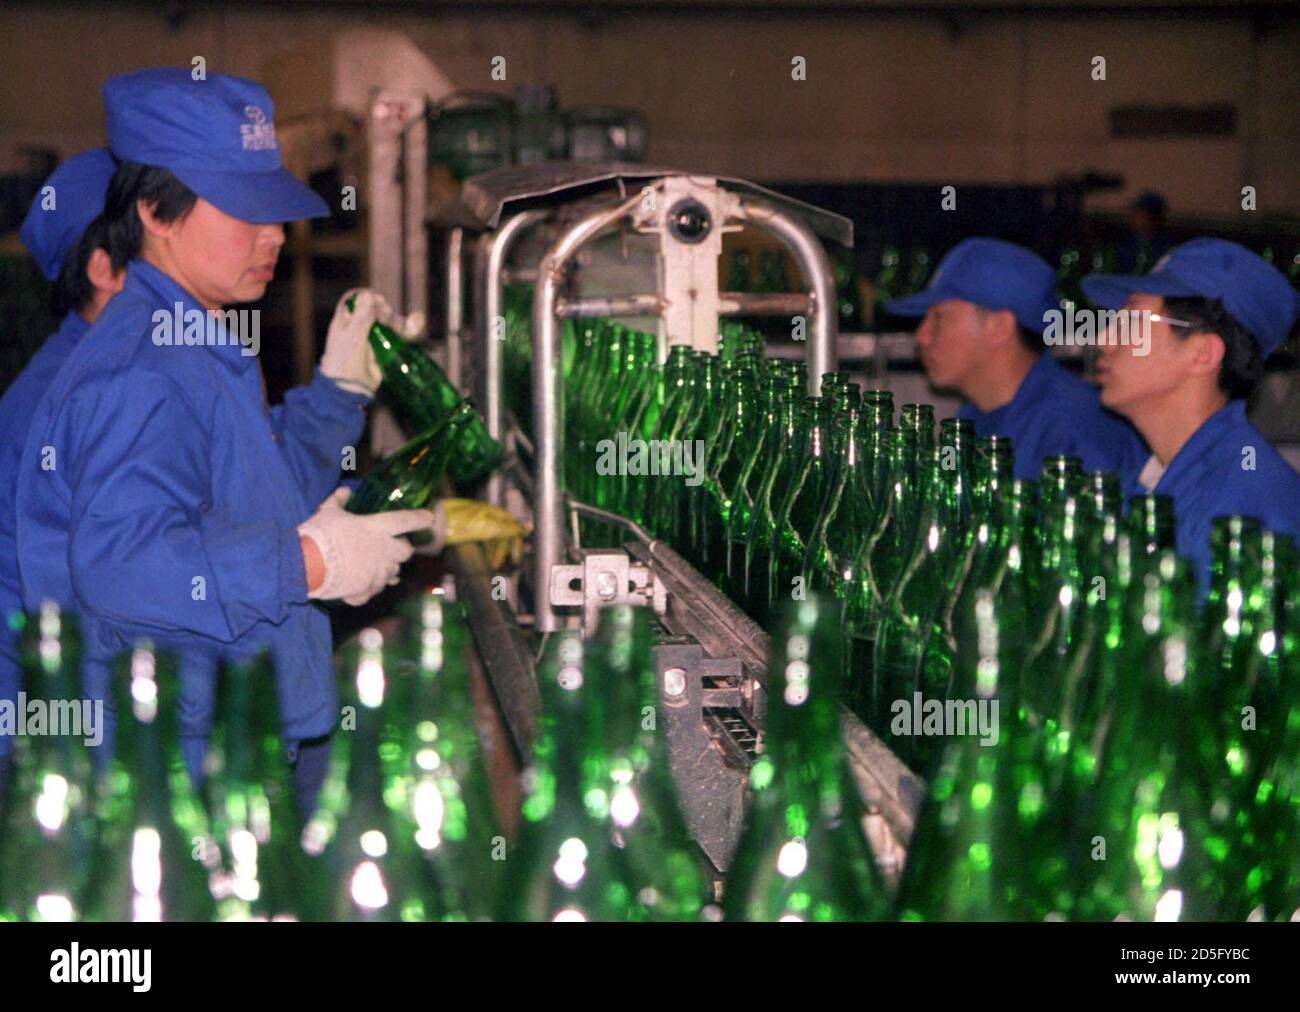 FOR RELEASE WITH STORY BC-FOOD-CHINA-BEER - Workers sort beer bottles at a  U.S.-China joint venture brewery in Beijing. ASIMCO, one of the largest  single private investors in China with ventures in autoparts